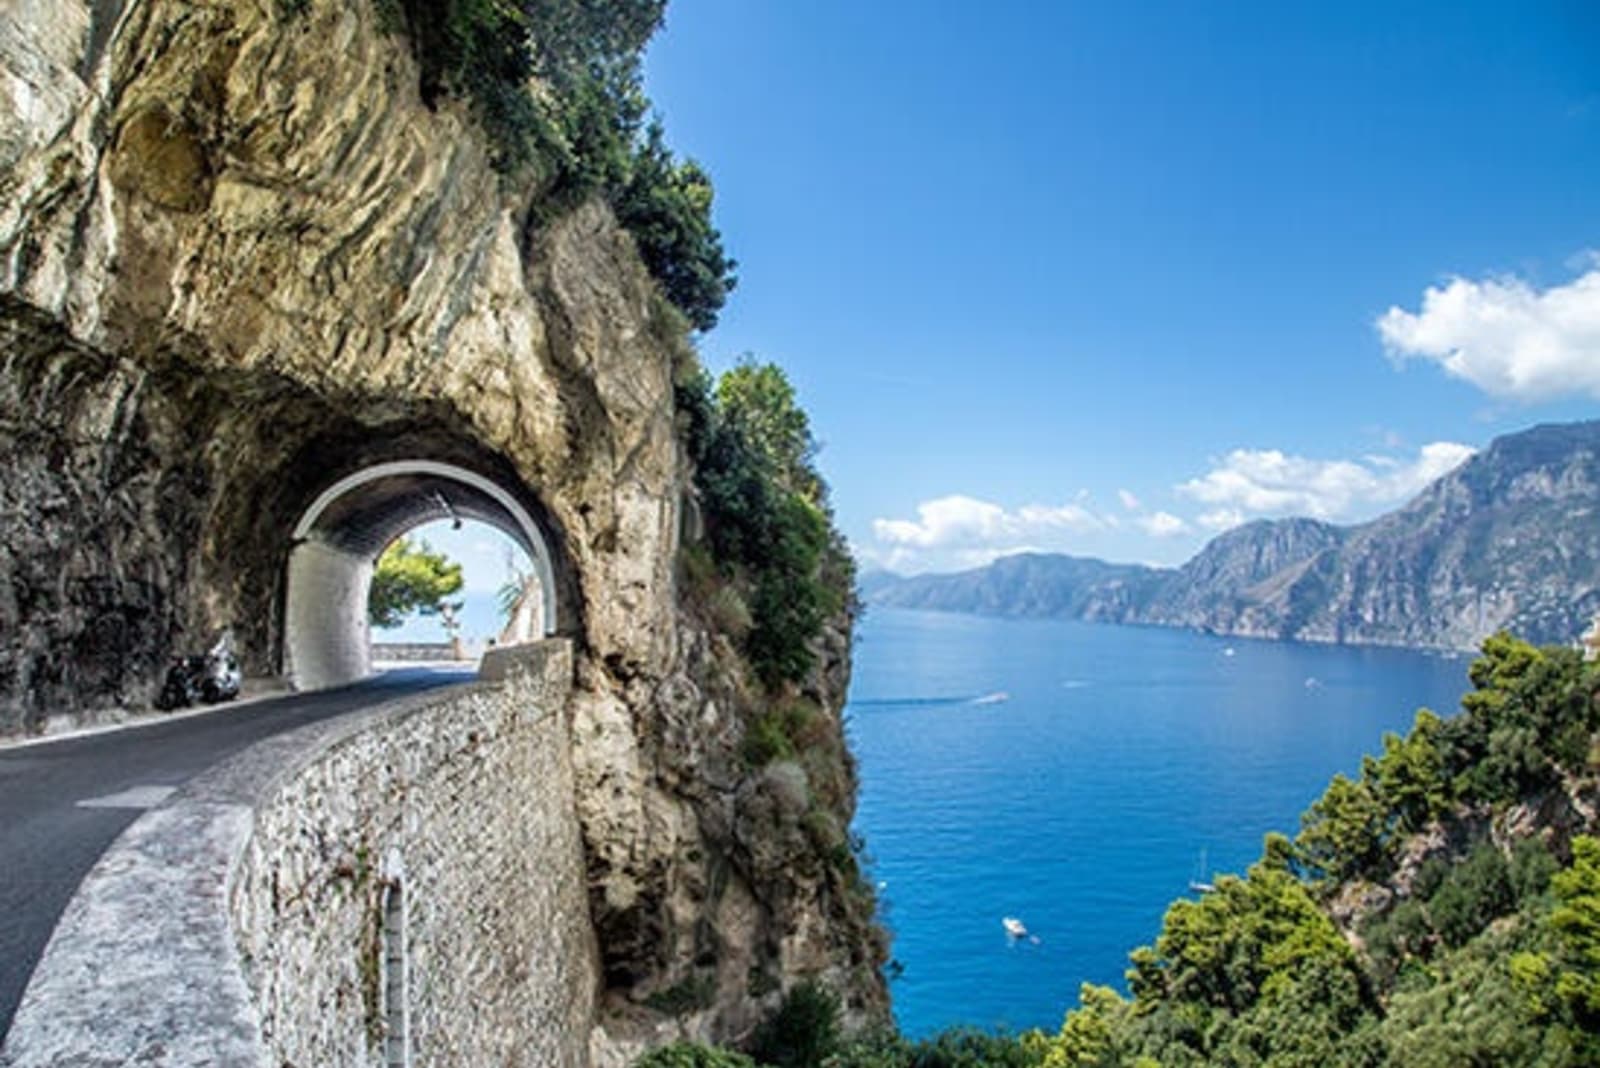 View of a tunnel overlooking Amalfi Coast.